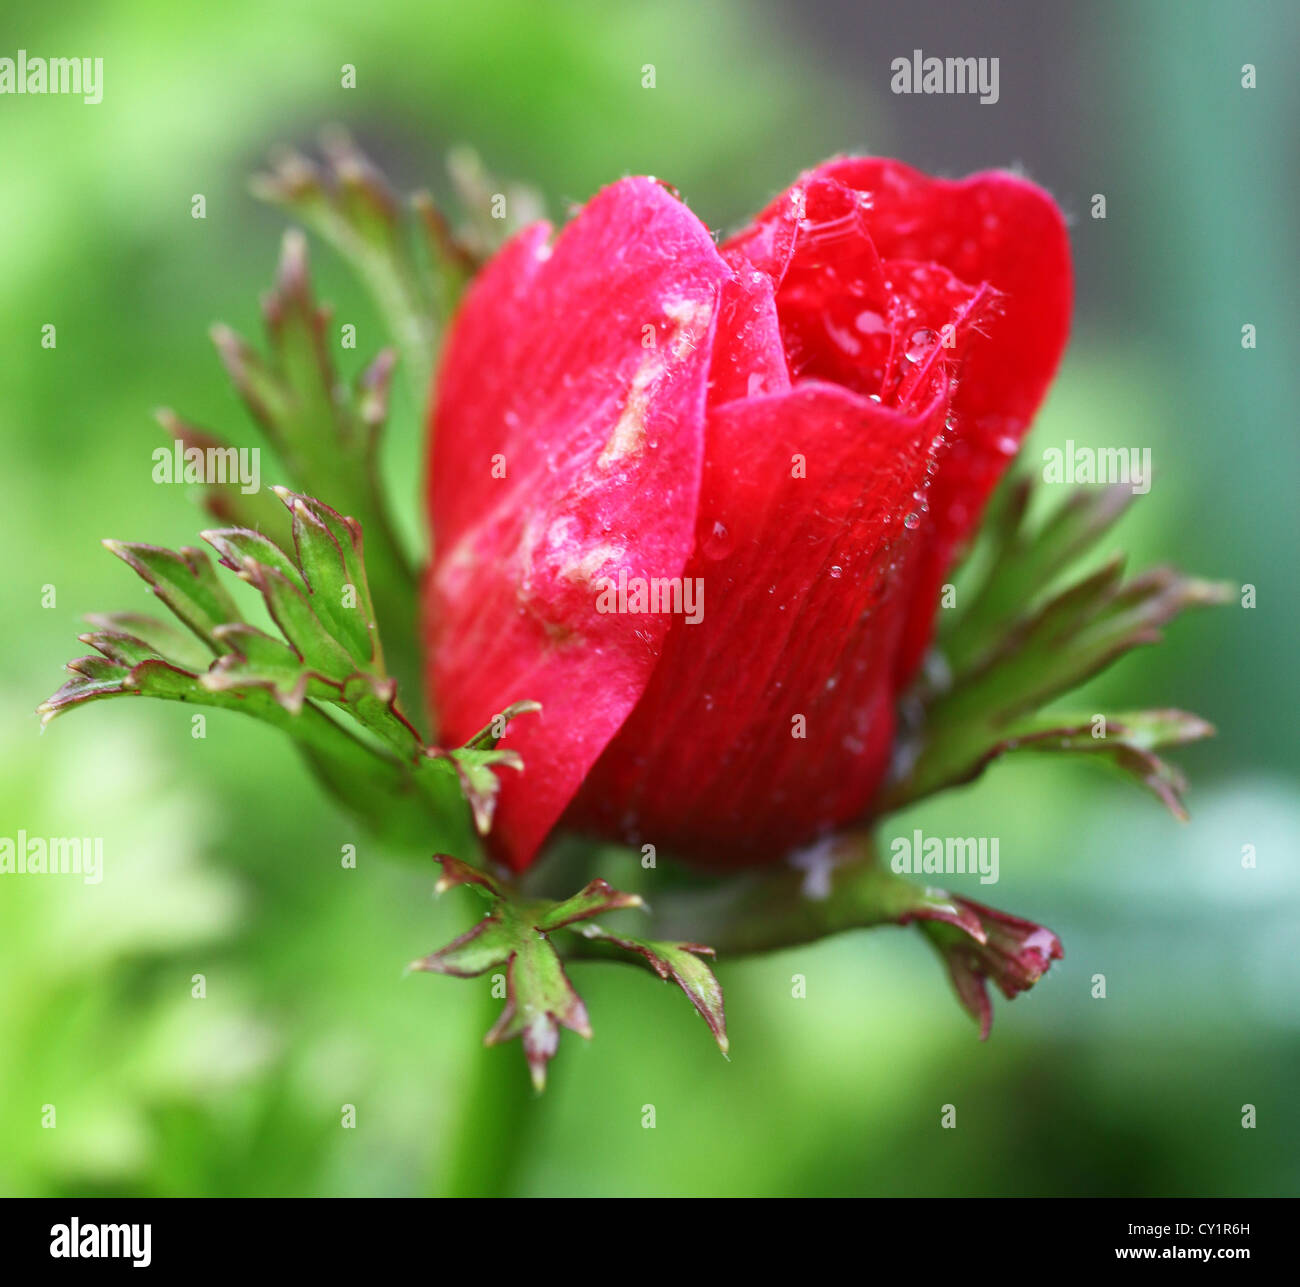 A red Anemone flower bud covered in rain drops Stock Photo